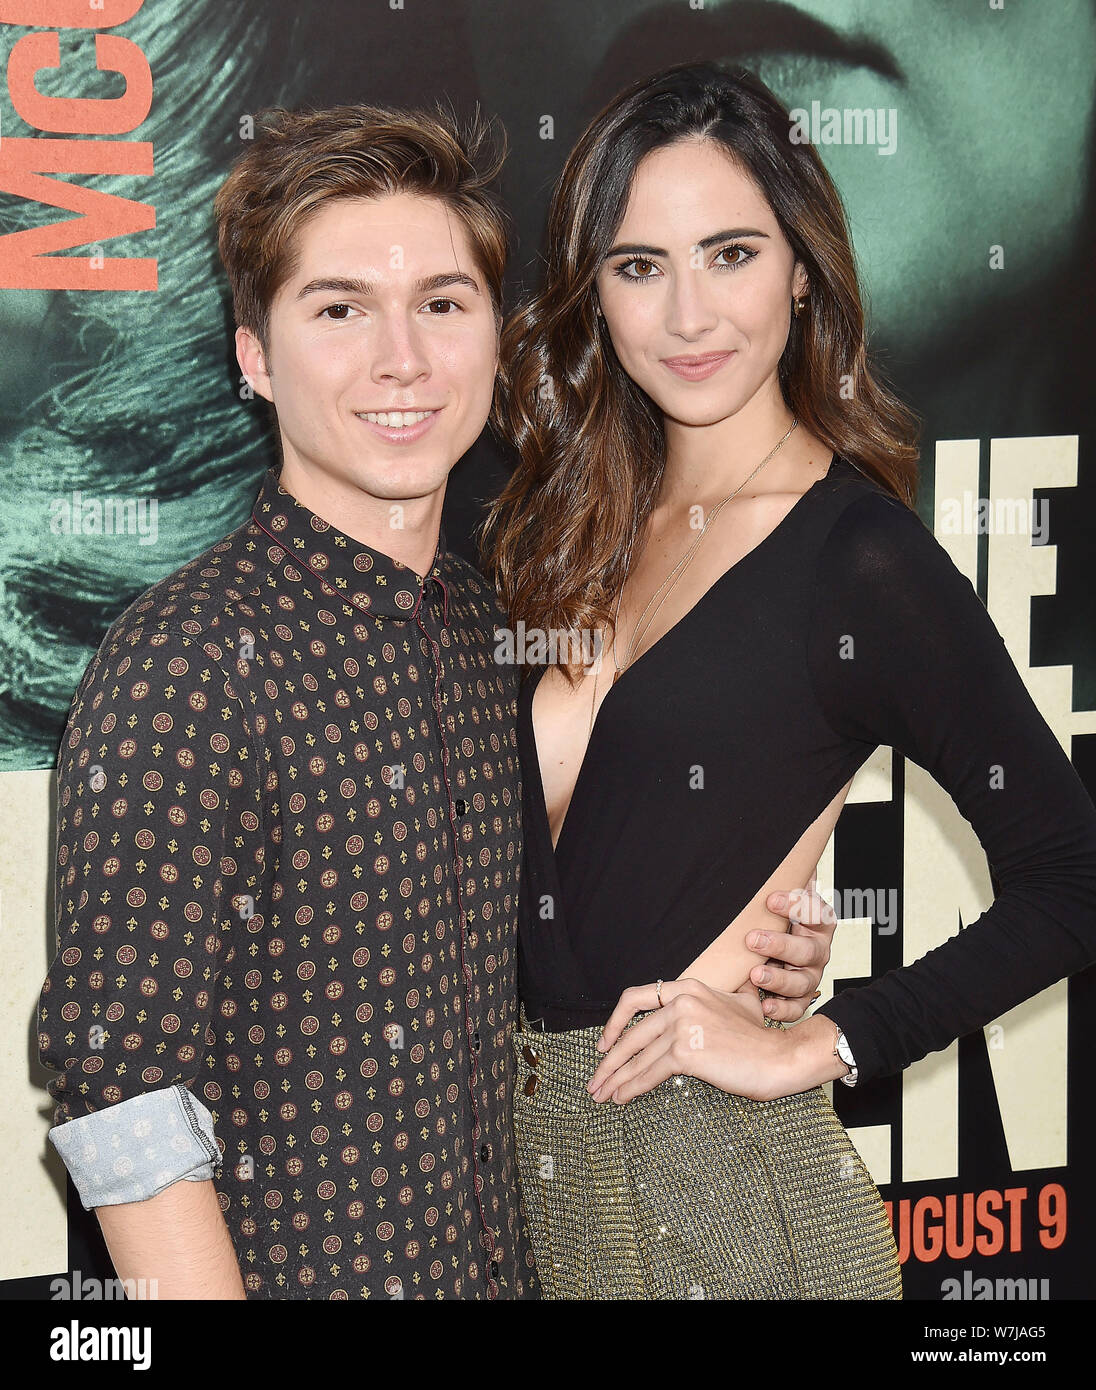 HOLLYWOOD, CA - AUGUST 05: Paul Butcher (L) and Marina Jacoby arrive at the Premiere Of Warner Bros Pictures' 'The Kitchen' Premiere Of Warner Bros Pictures' 'The Kitchen' at TCL Chinese Theatre on August 05, 2019 in Hollywood, California. Stock Photo